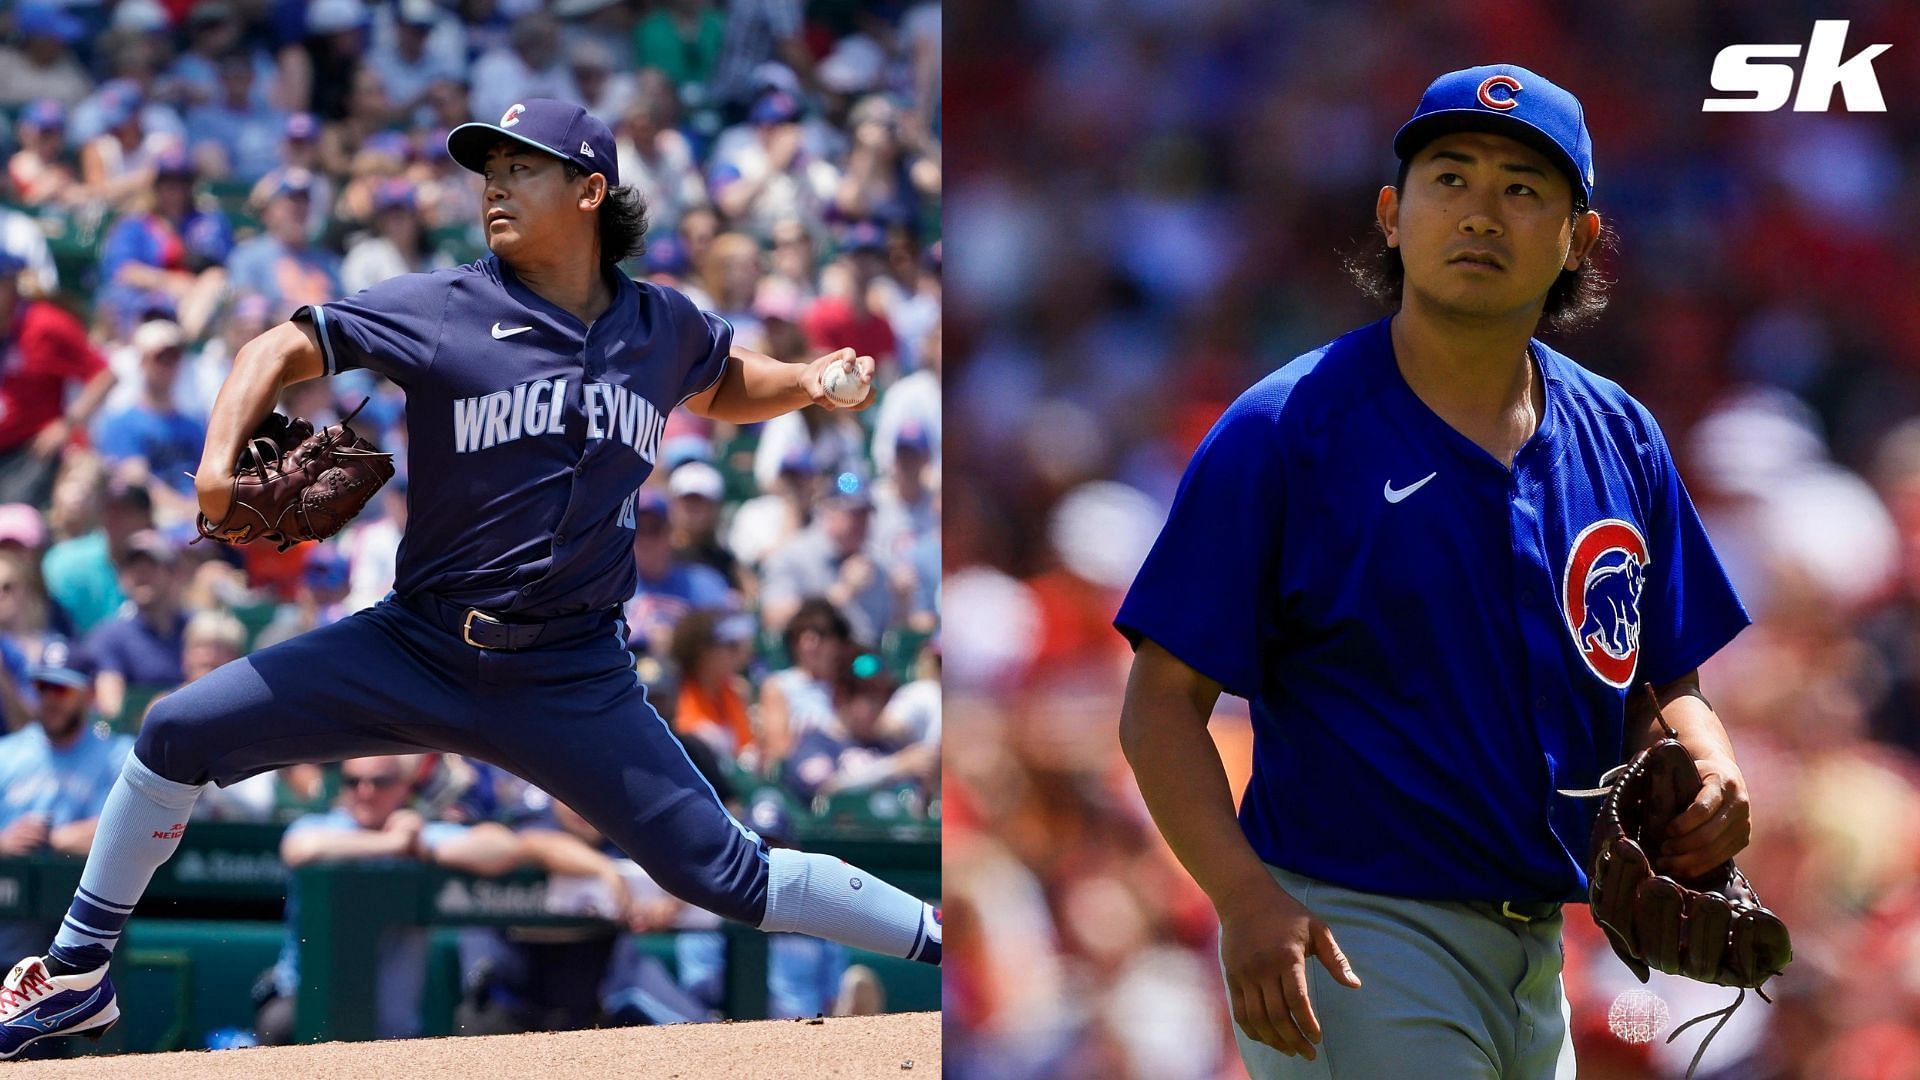 Shota Imanaga delivered the worst outing of his career, giving up 8 runs to the New York Mets